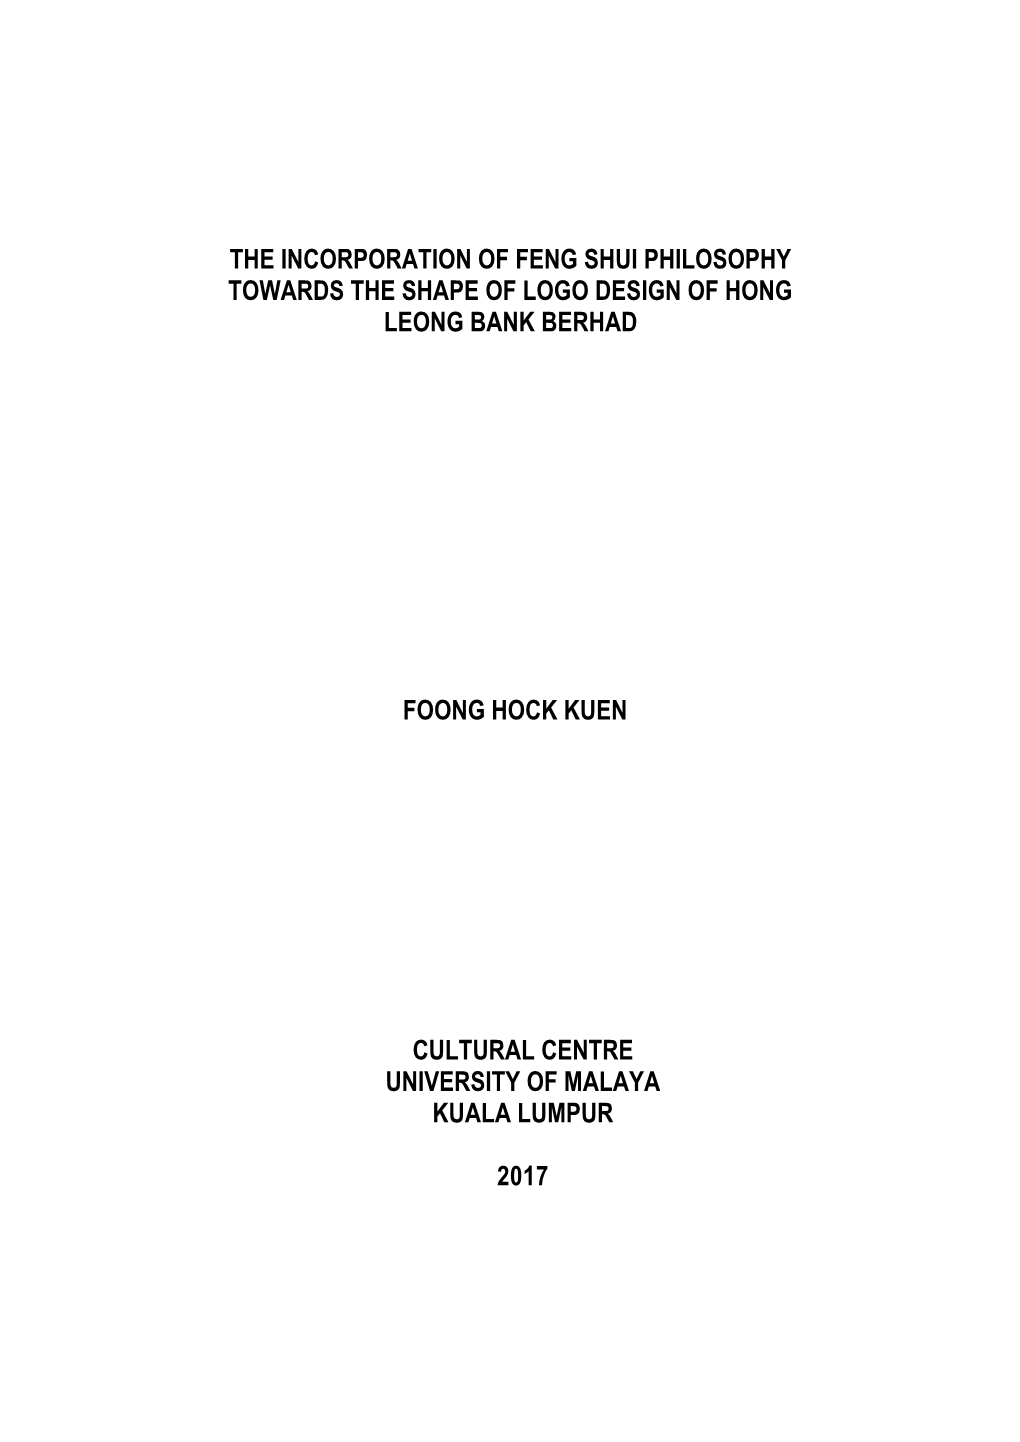 The Incorporation of Feng Shui Philosophy Towards the Shape of Logo Design of Hong Leong Bank Berhad